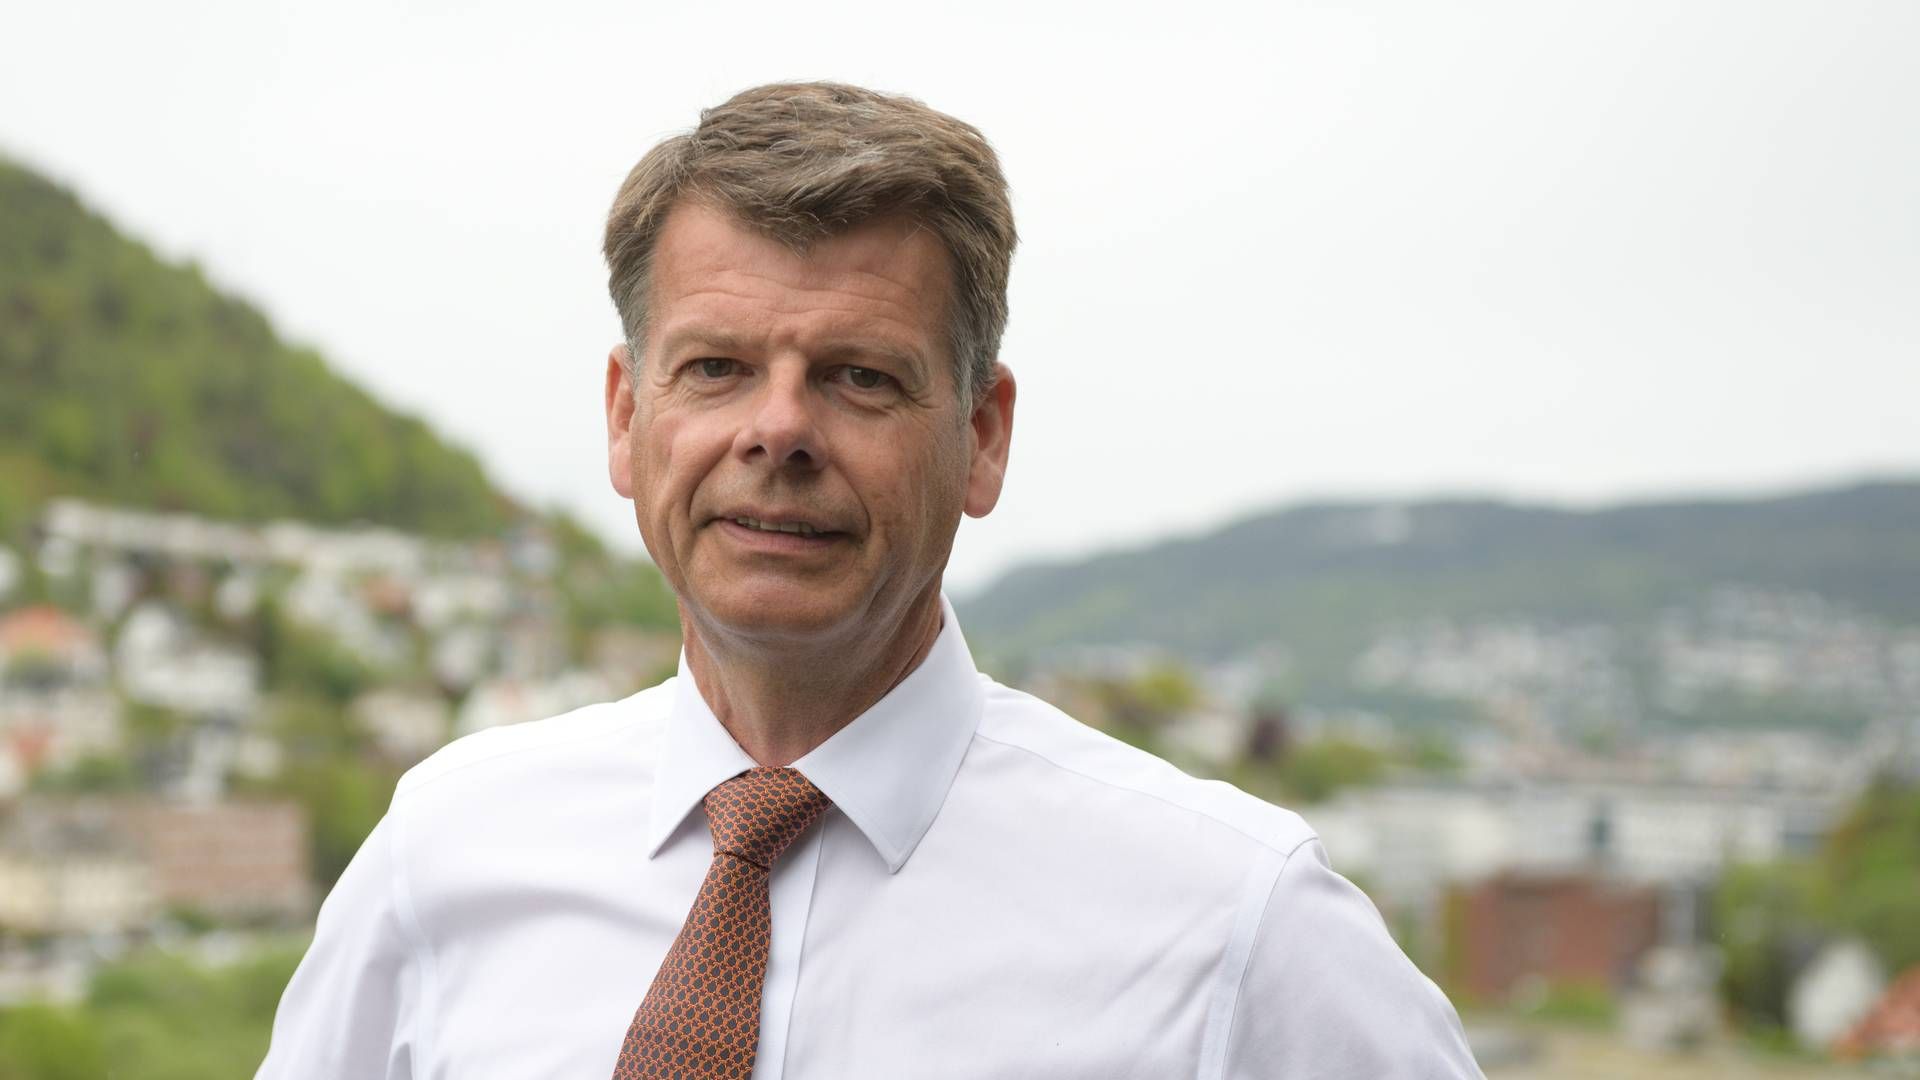 Harald Fotland is new CEO of Norwegian company Odfjell. He takes over from his long-time colleague Kristian Mørch. | Photo: Gunnar Eide/Odfjell